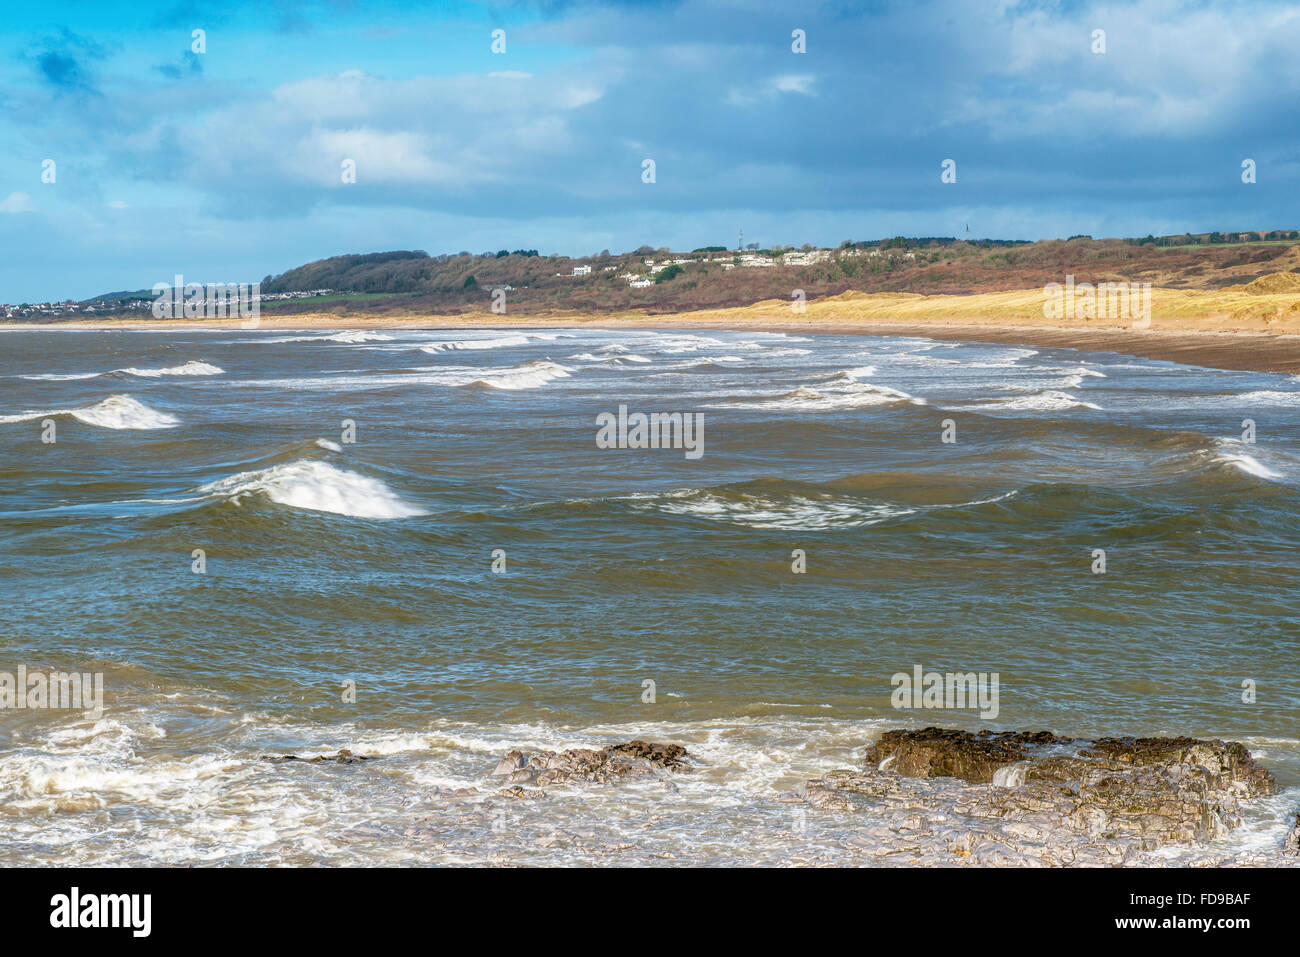 The Mouth of the River Ogmore at Ogmore by Sea, on the Glamorgan Heritage Coast, south Wales, UK, on a very windy day Stock Photo